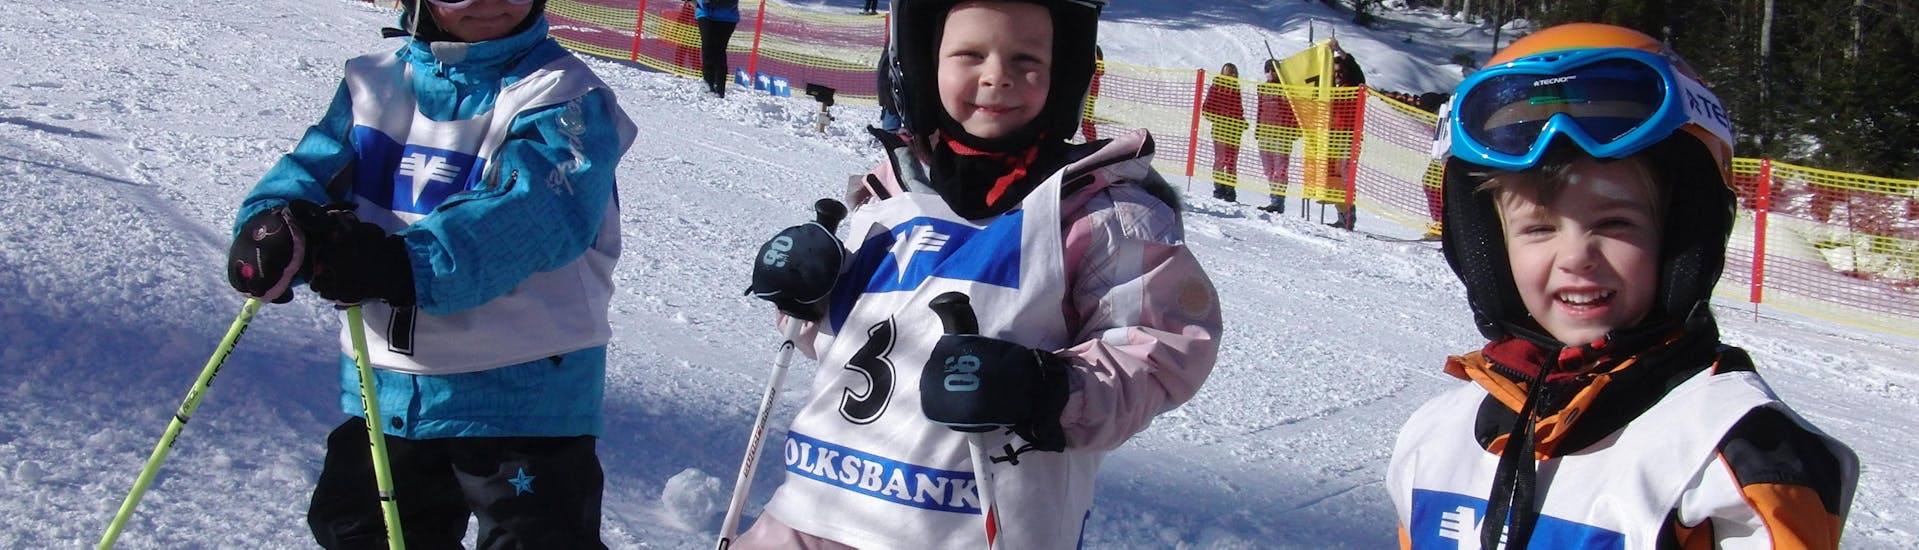 Kids Ski Lessons (4-6 y.) for All Levels.